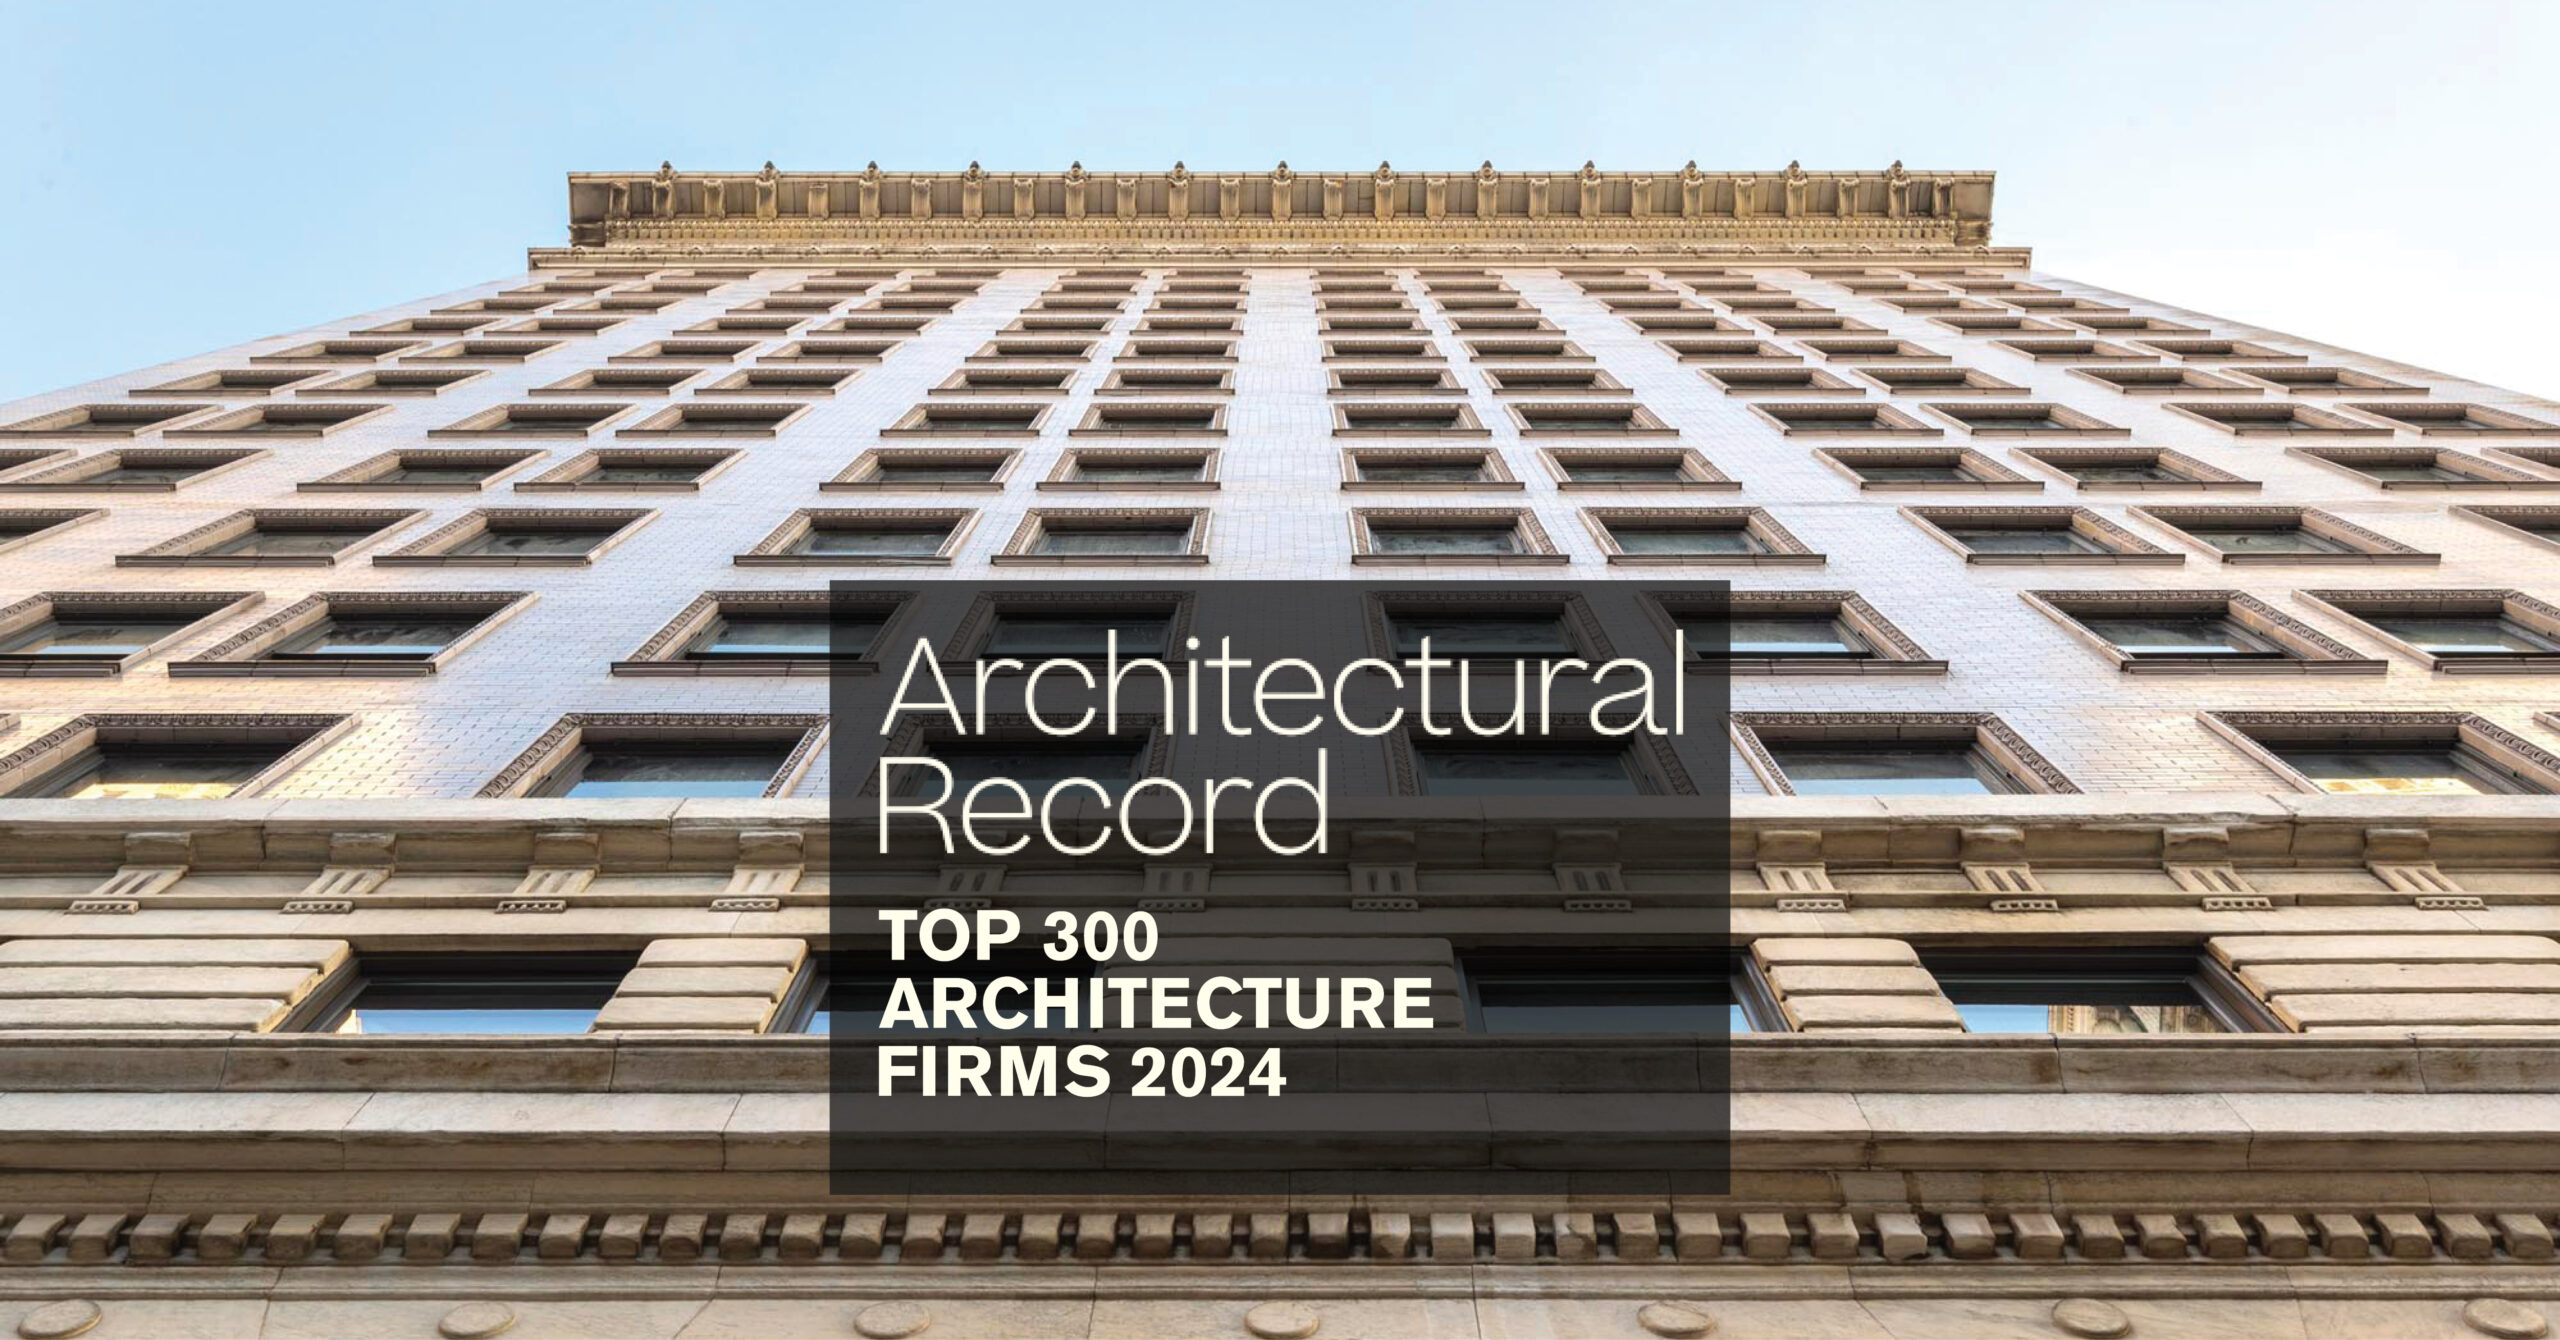 Architectural Record Top 300 Architecture Firms